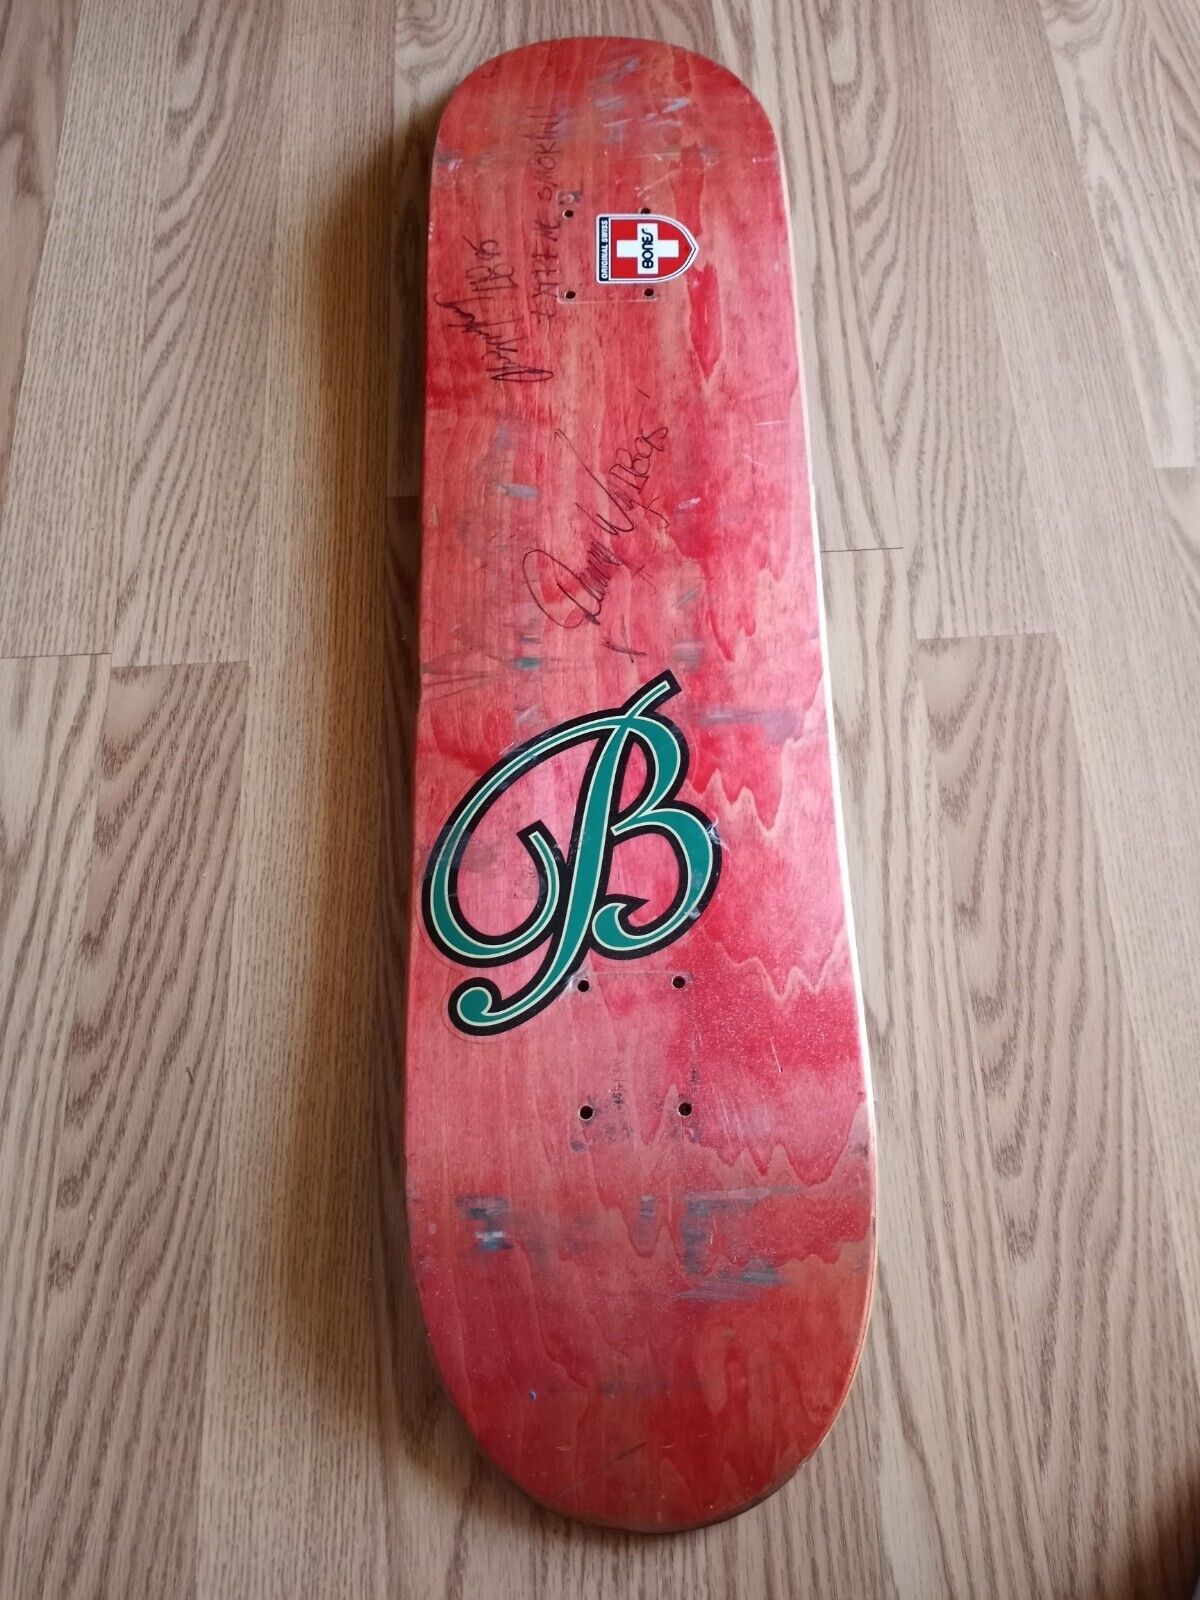 Danny Way\'s 1995 ESPN extreme games event used deck autographed One of a kind